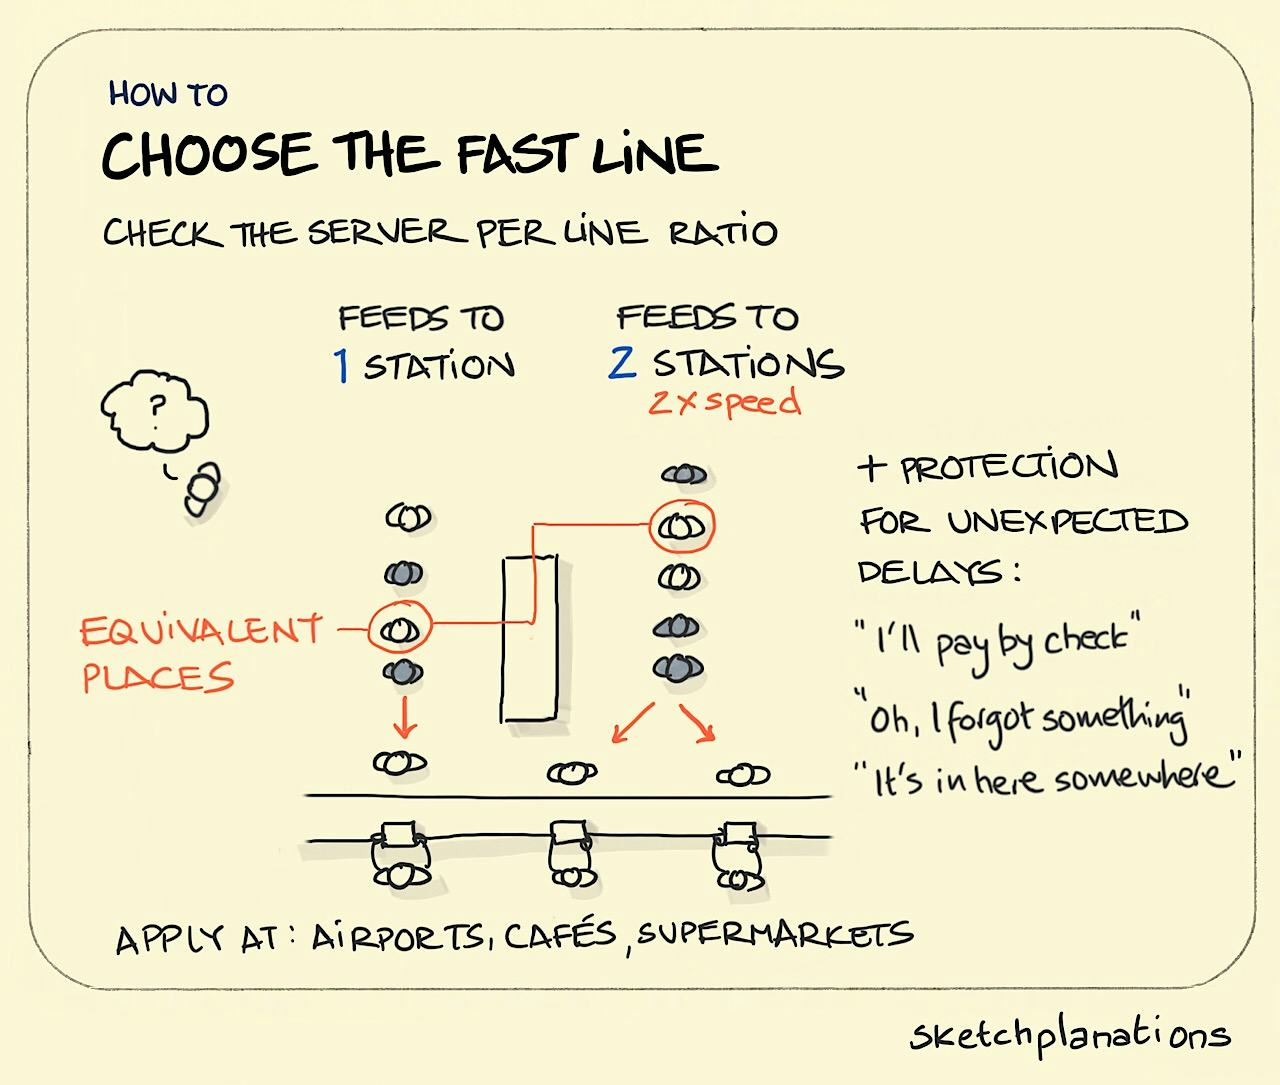 Choose the fast line - Sketchplanations